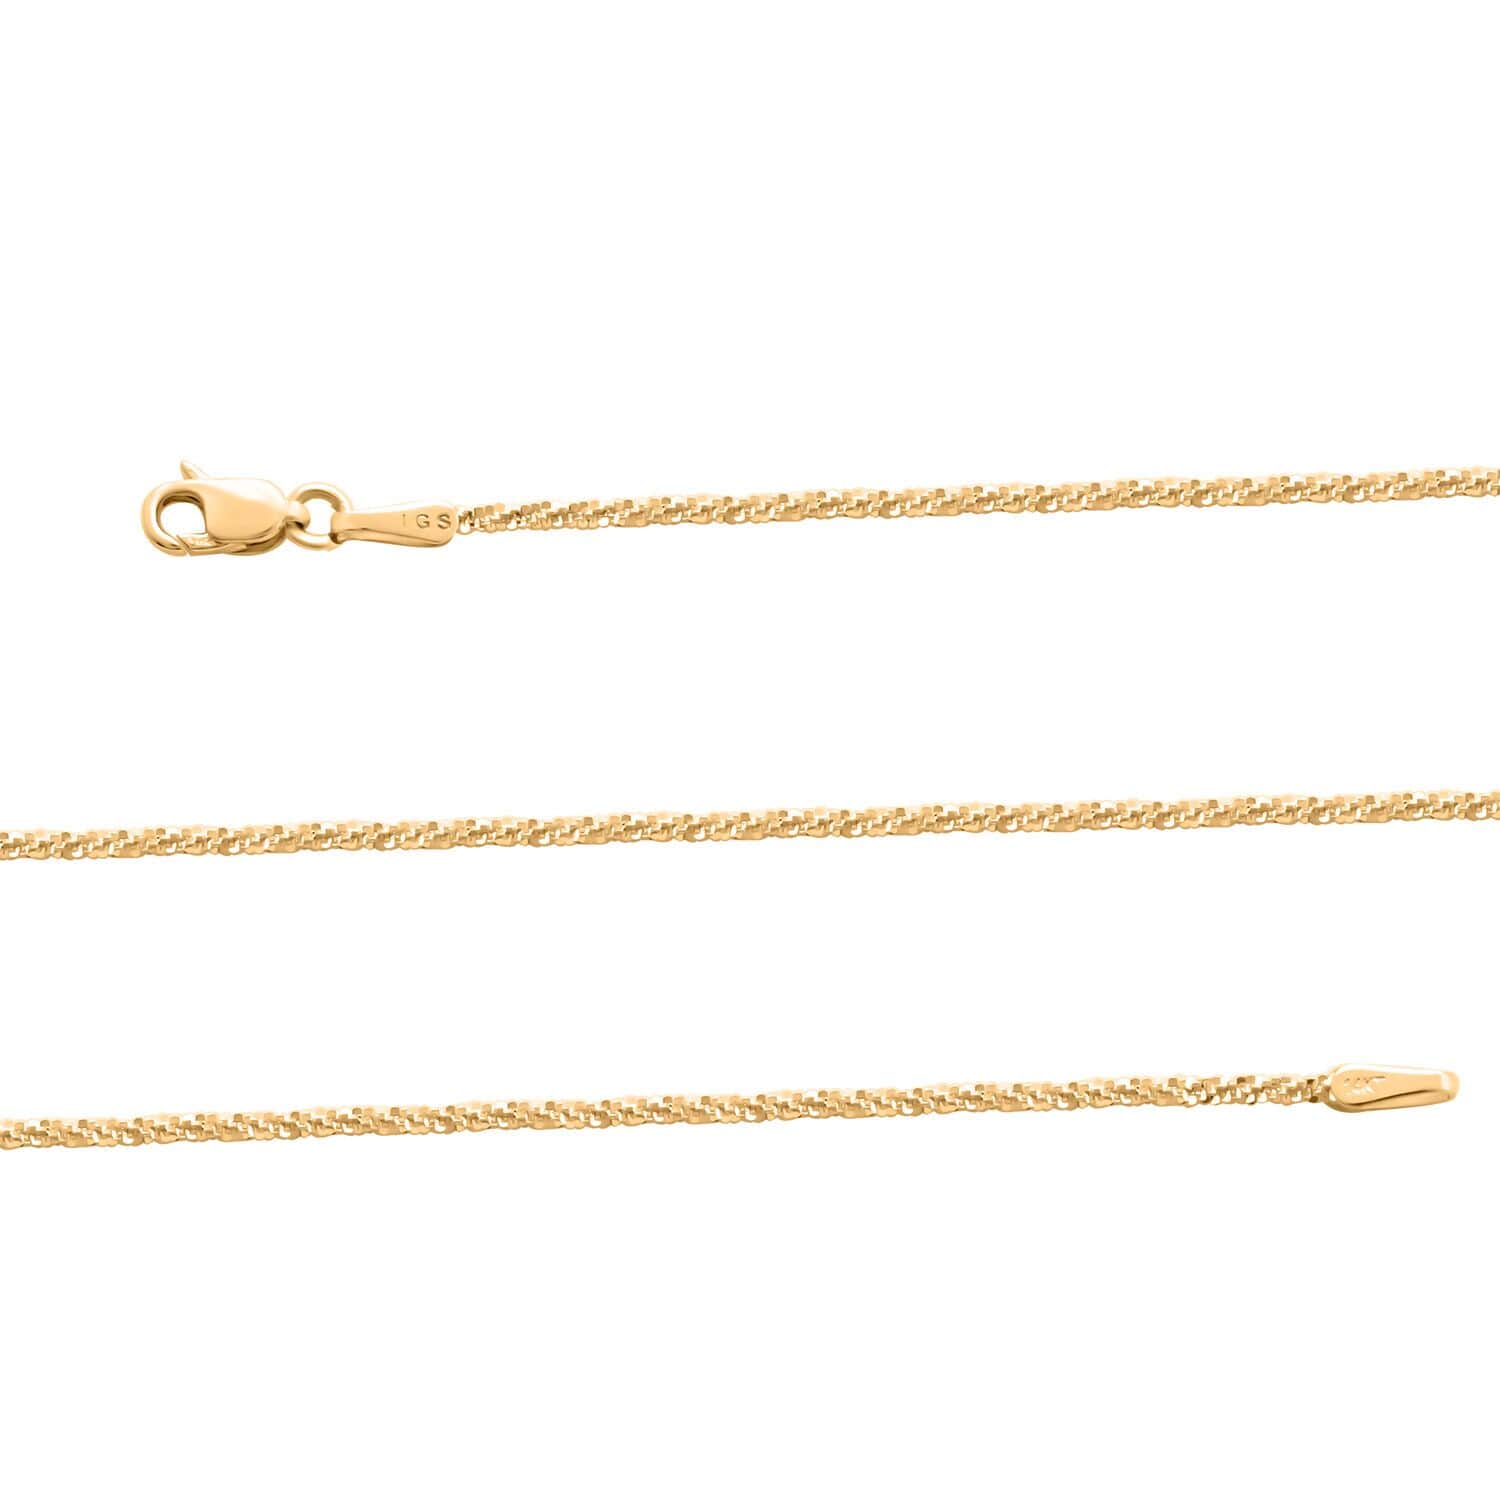 Buy 14K Yellow Gold 1.5mm Sparkle Chain Necklace 24 Inches 2.40